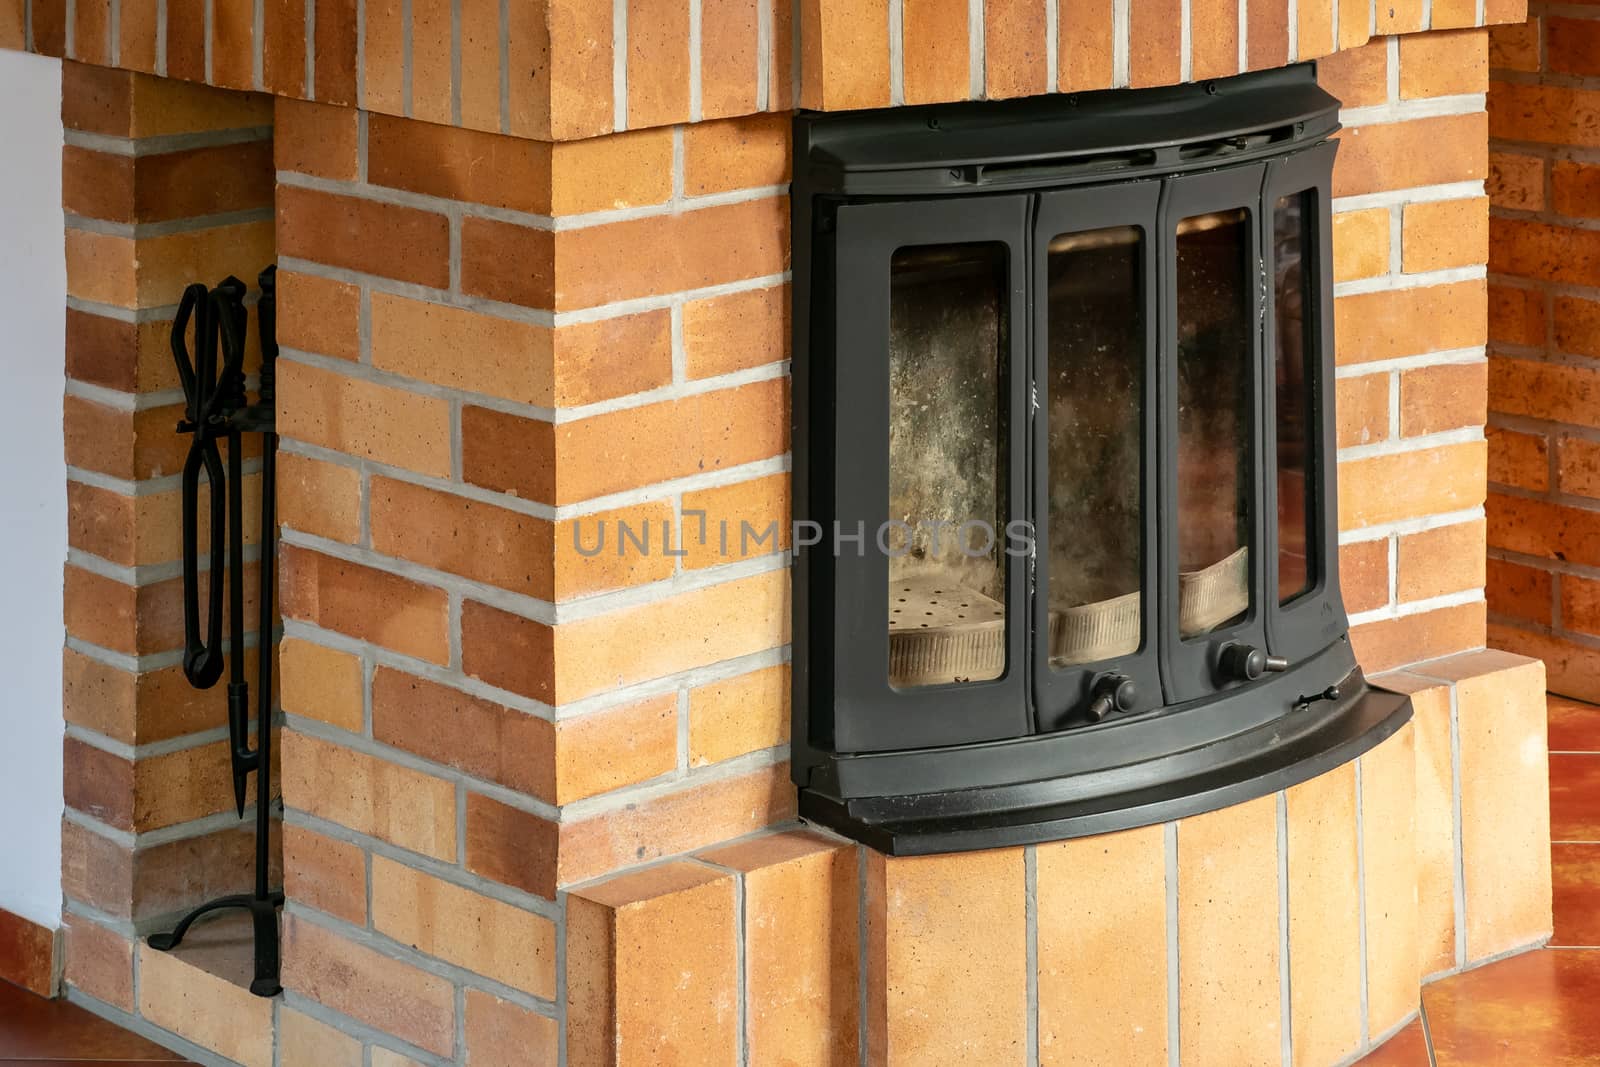 Fireplace, detail of home interior. Fireplace covered with firec by xtrekx